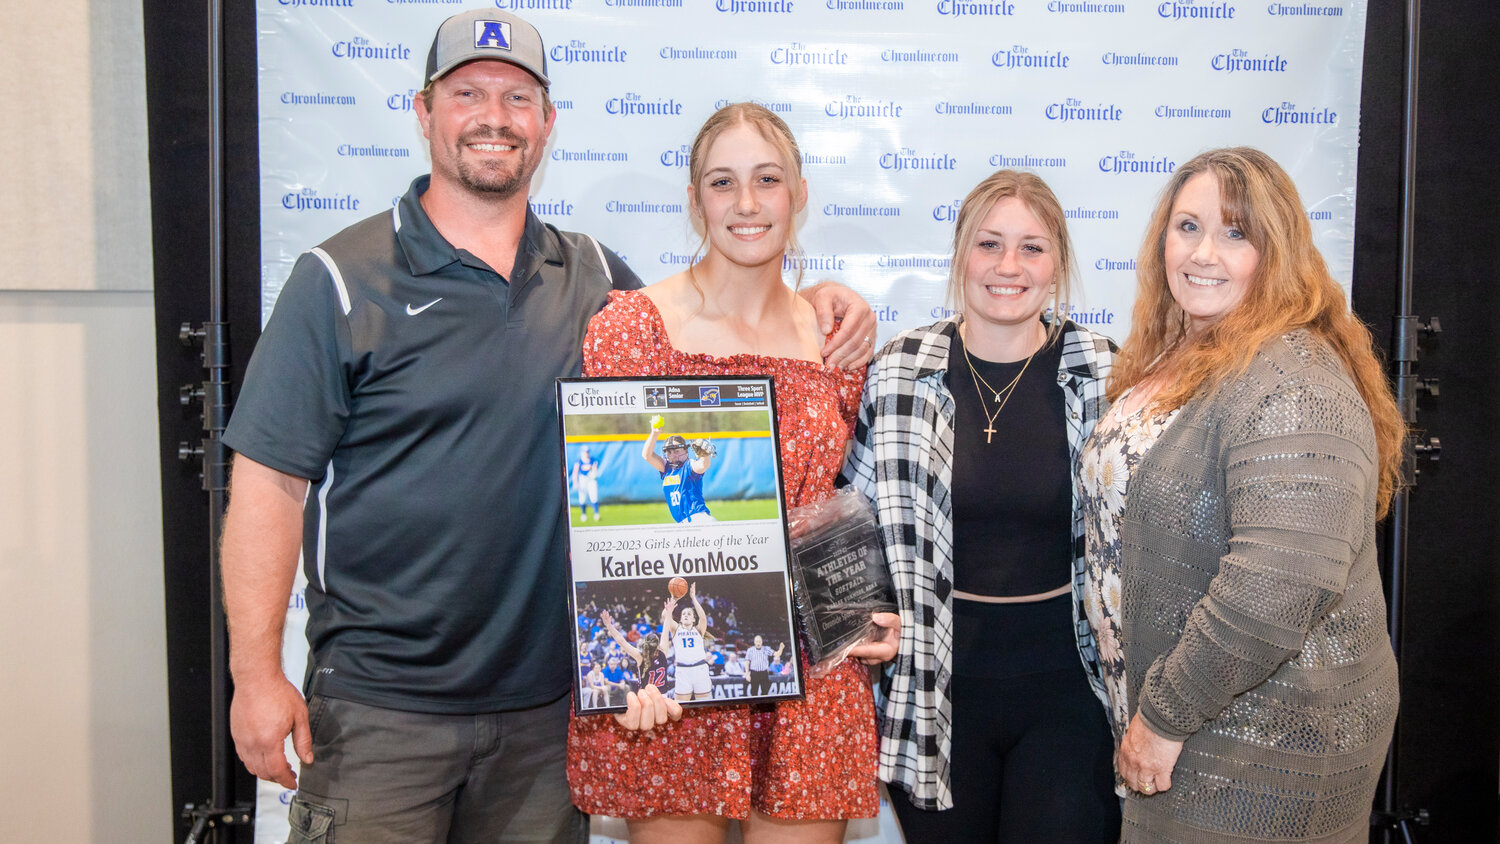 Adna’s Karlee VonMoos, a league MVP in each of the three sports she played this year, smiles for a photo with family Tuesday evening during the “Athletes of the Year” banquet at the Jester Auto Museum. VonMoos dominated the soccer pitch, basketball court and the softball diamond en route to one of the strongest all around sports careers in Adna.